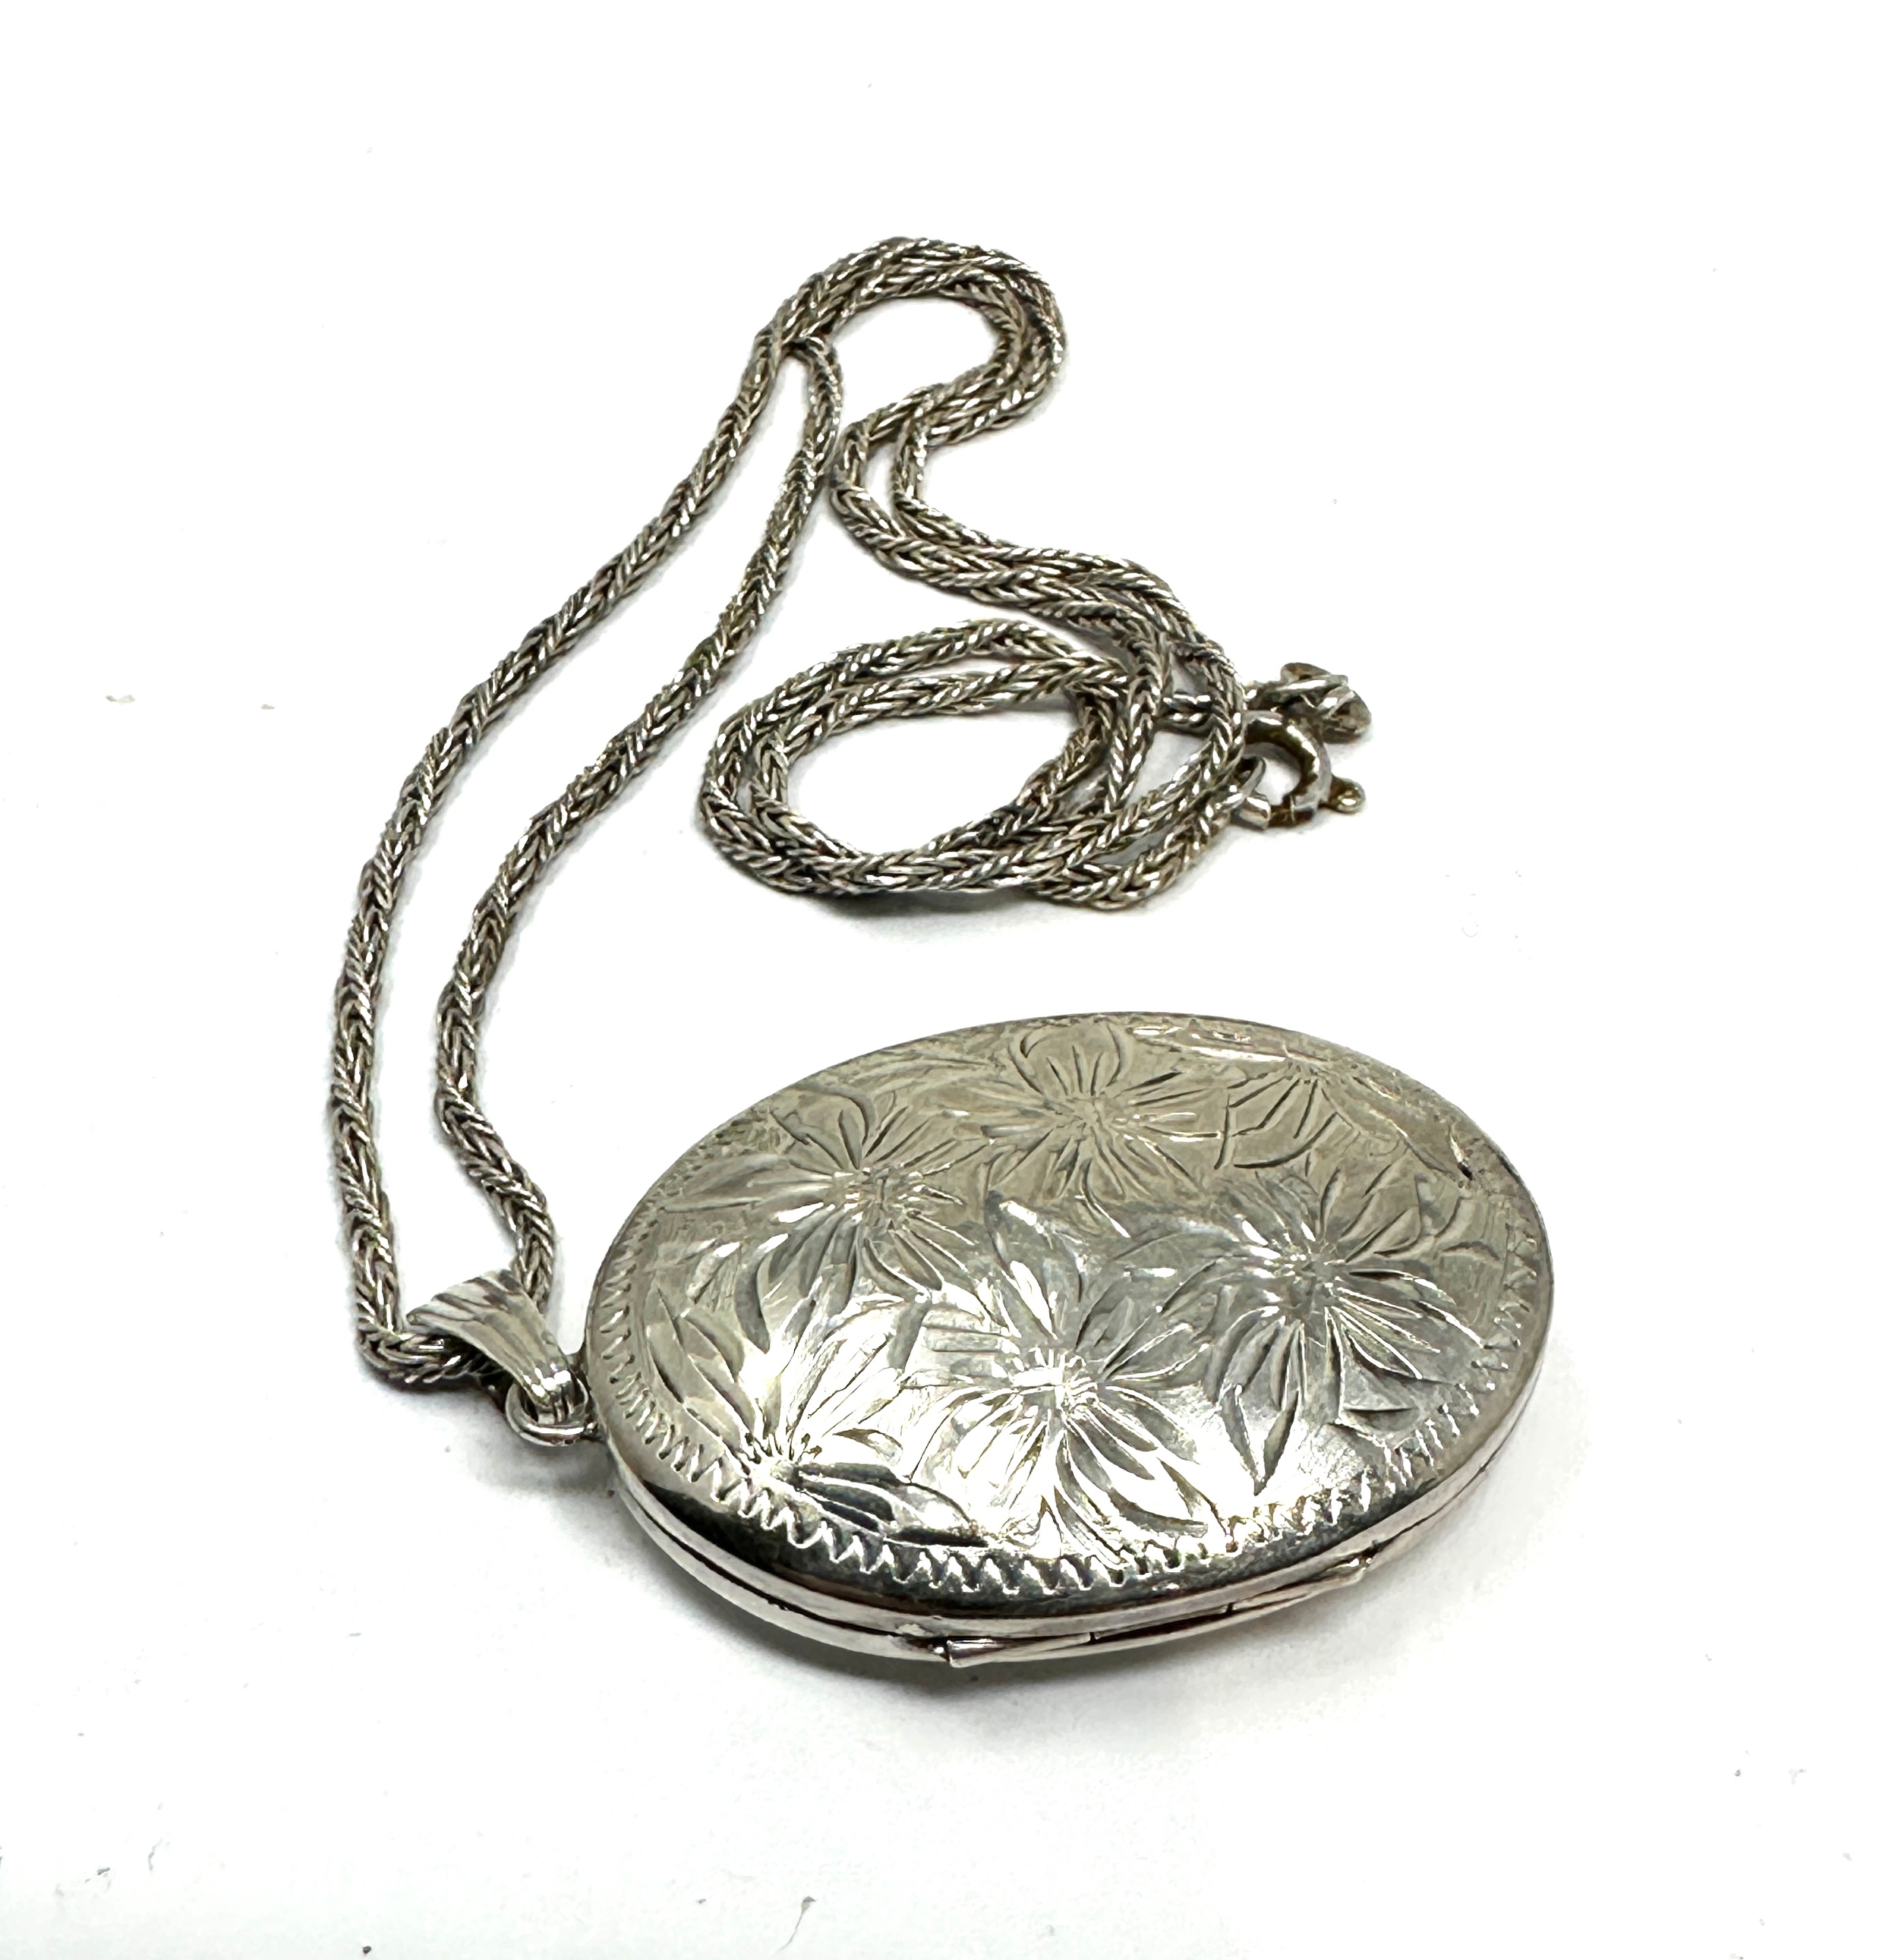 silver locket and chain weight 12g - Image 2 of 2